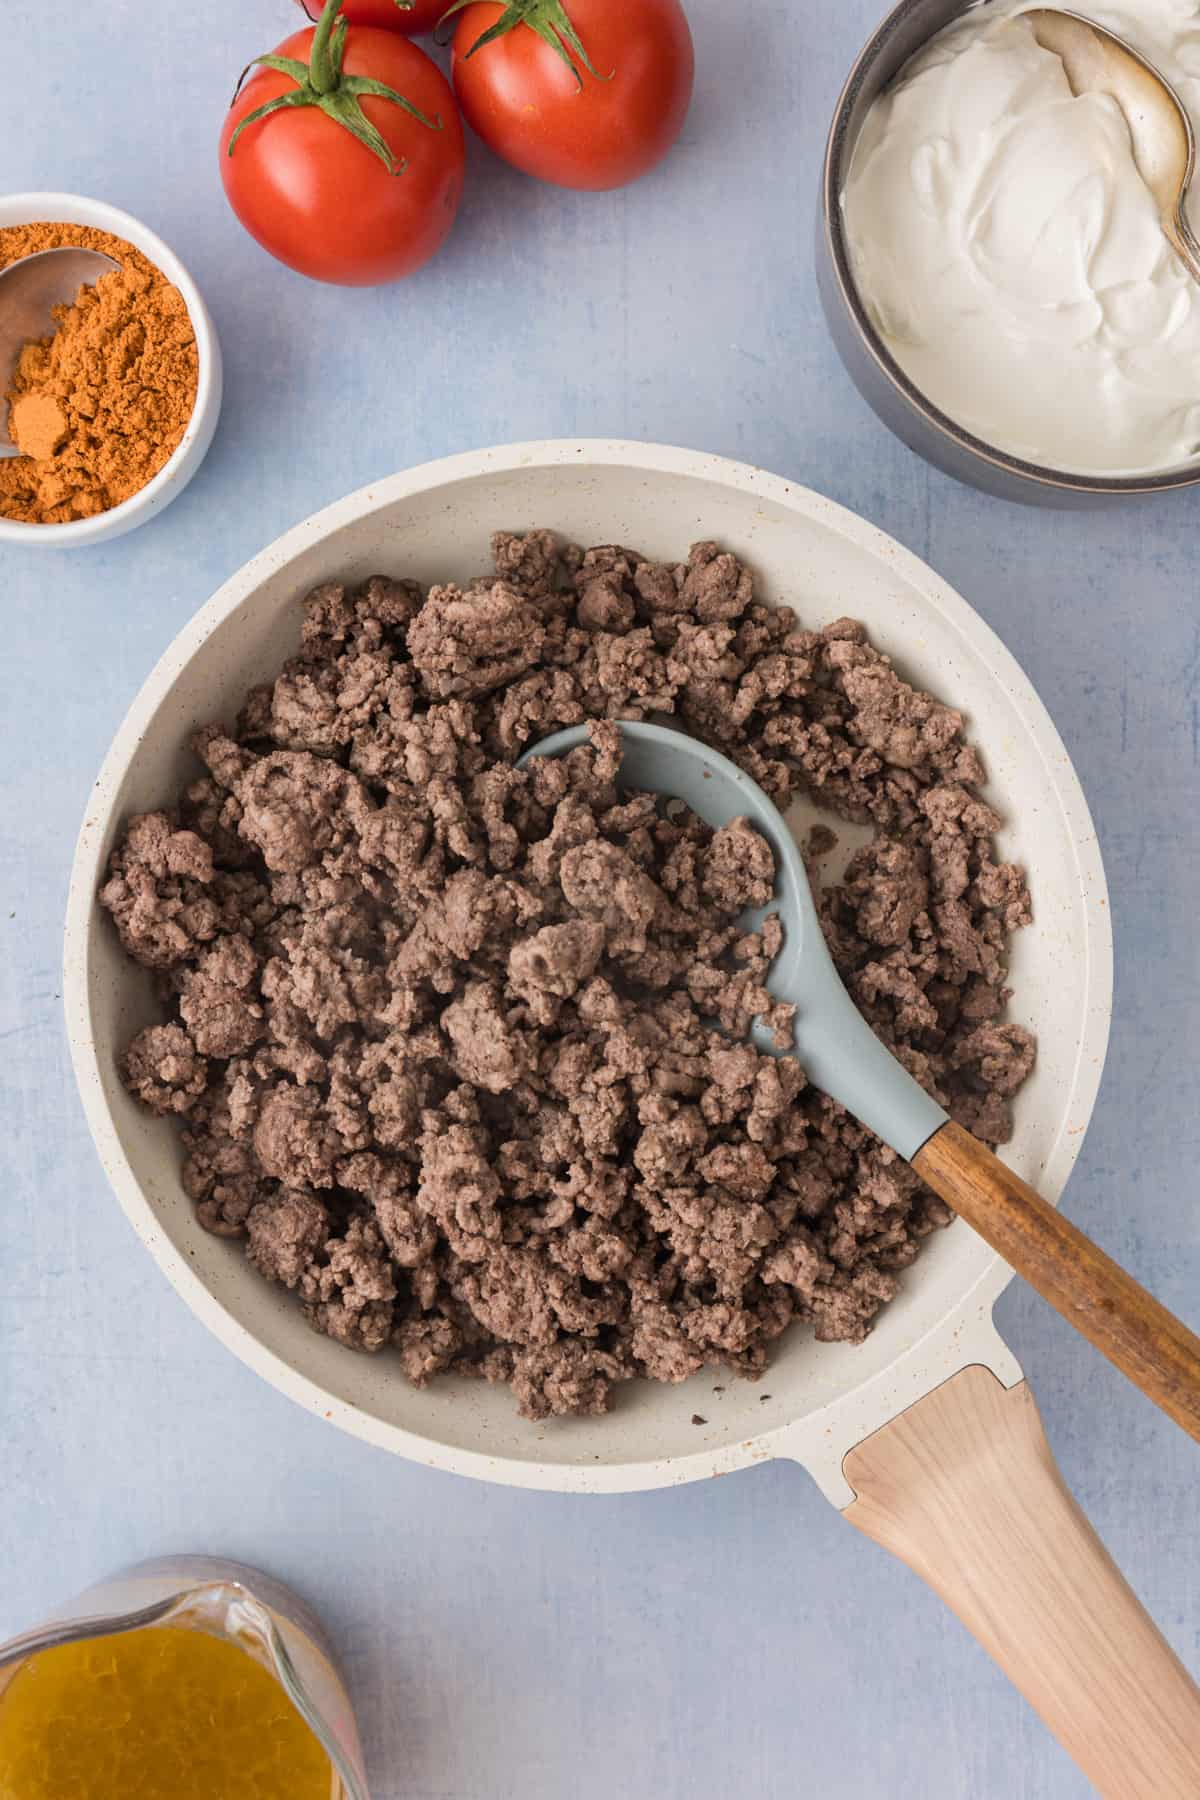 Ground beef in a frying pan.